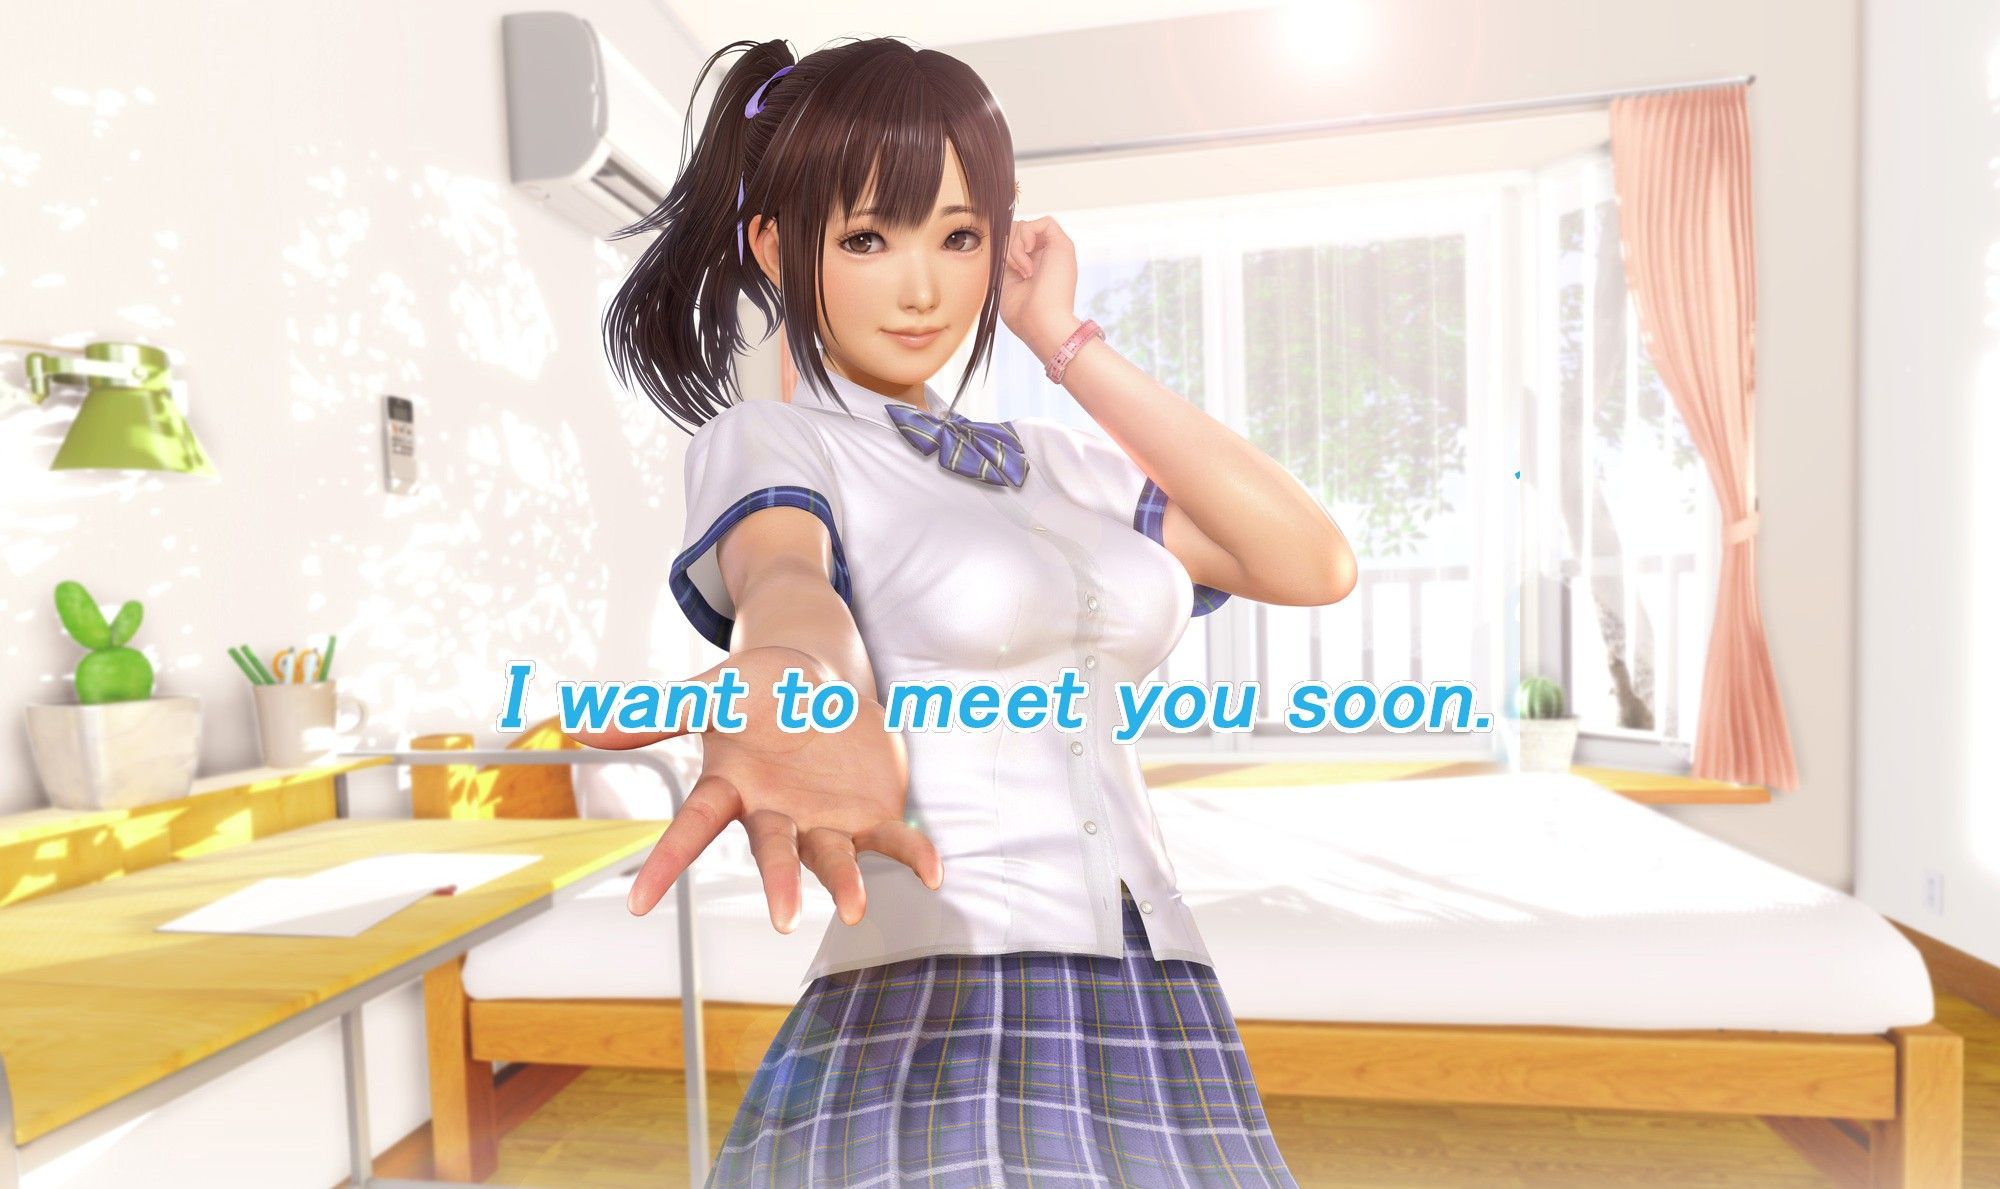 Michelangelo vandfald kim YouTube Terminates VR Kanojo's Account, Killing the Trailers of the Summer  Lesson Adult Lookalike